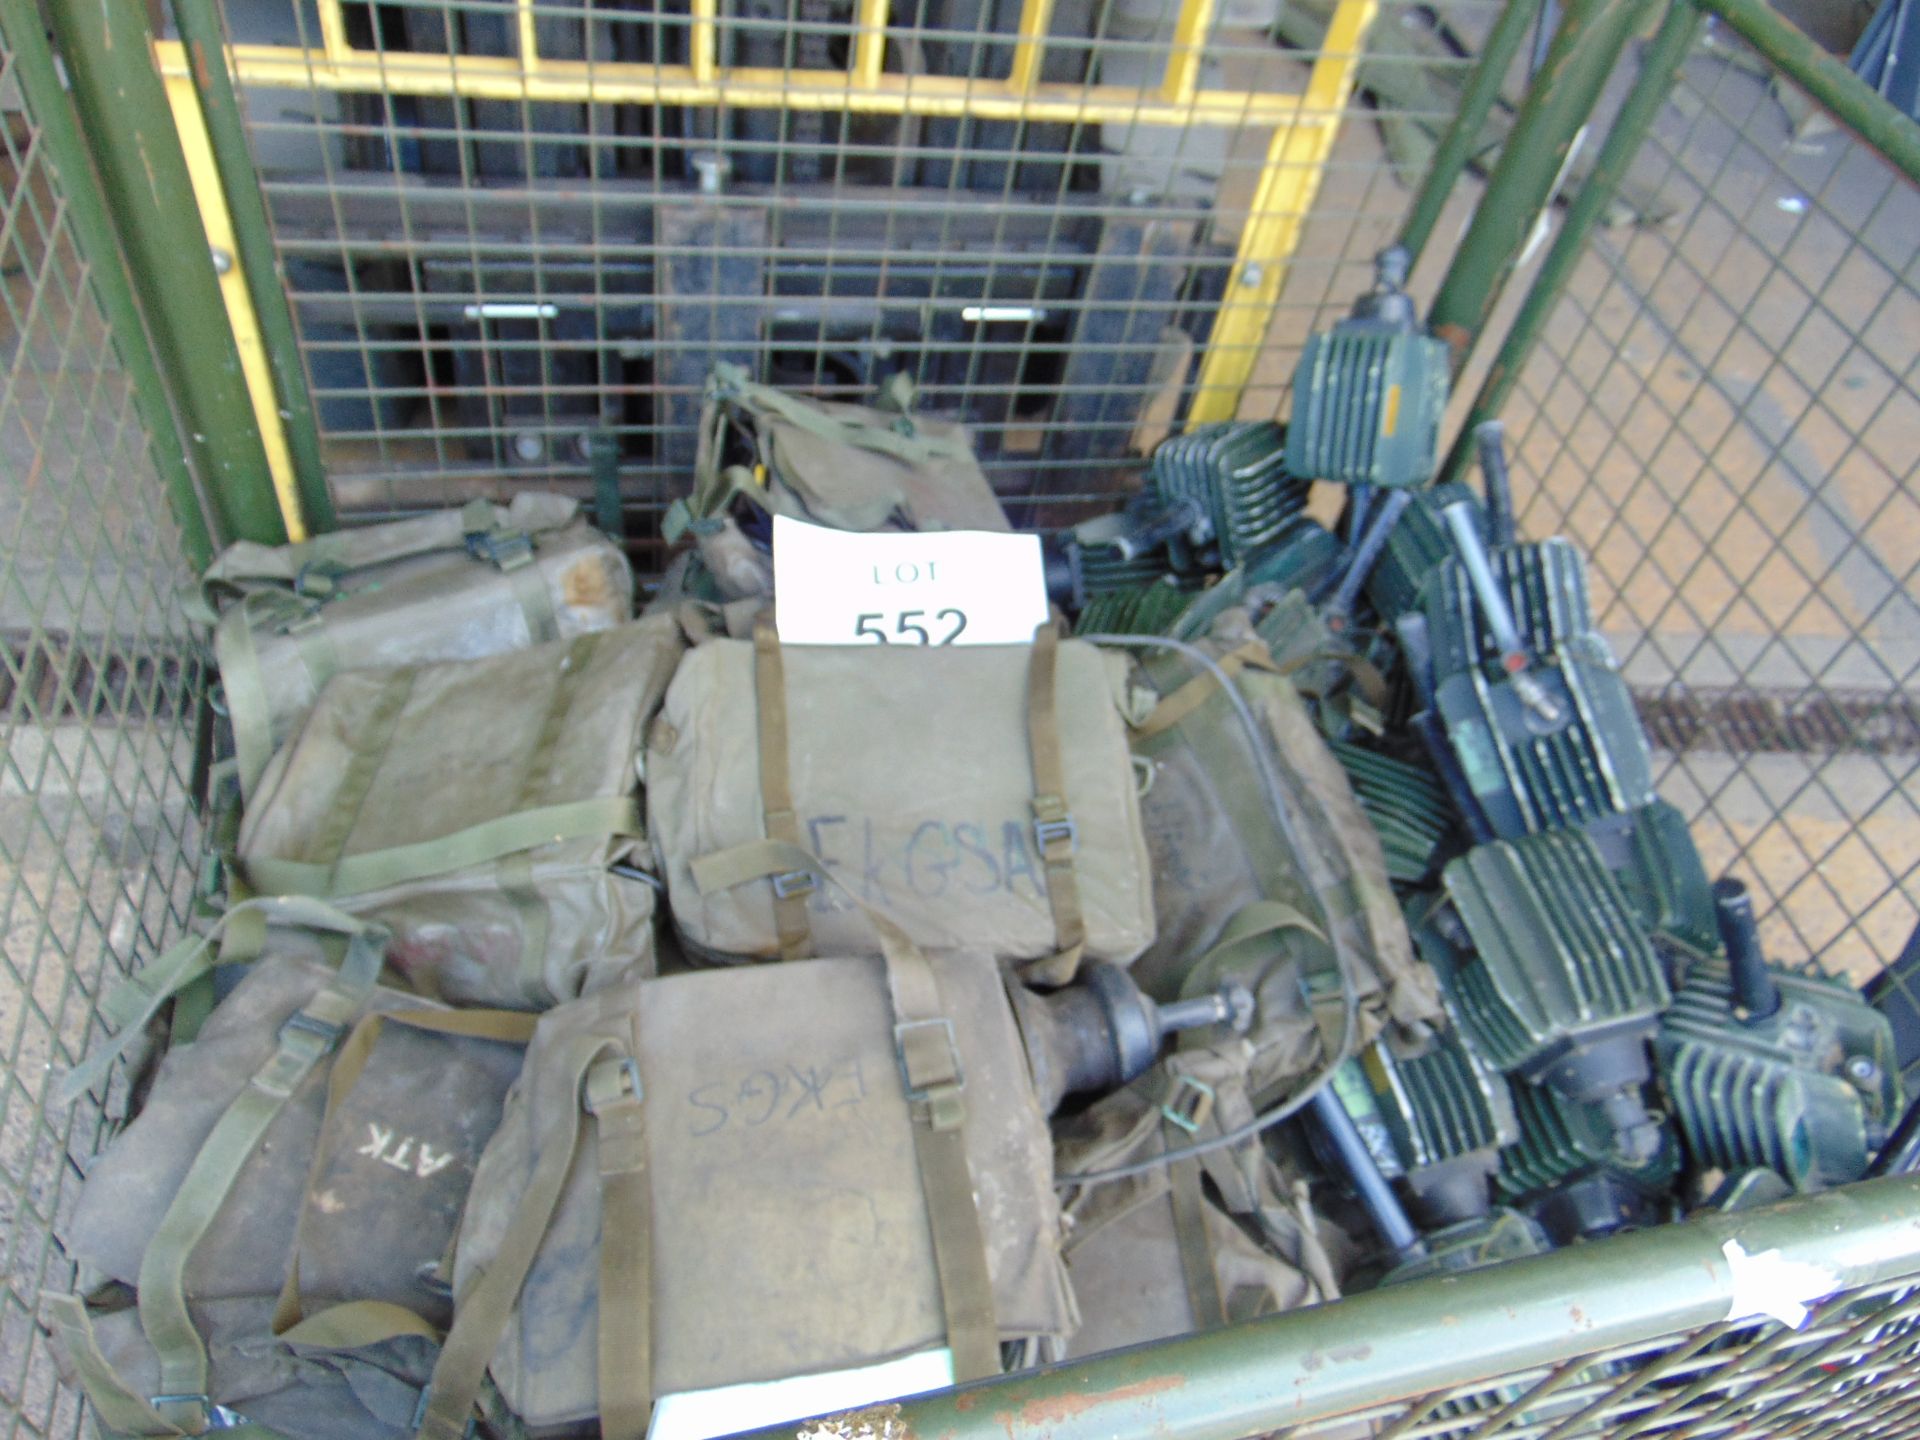 1X STILLAGE CLANSMAN ANTENNA BASE ELEMENT AND COMMS BAGS WITH CONTENTS X 50+ - Image 4 of 9